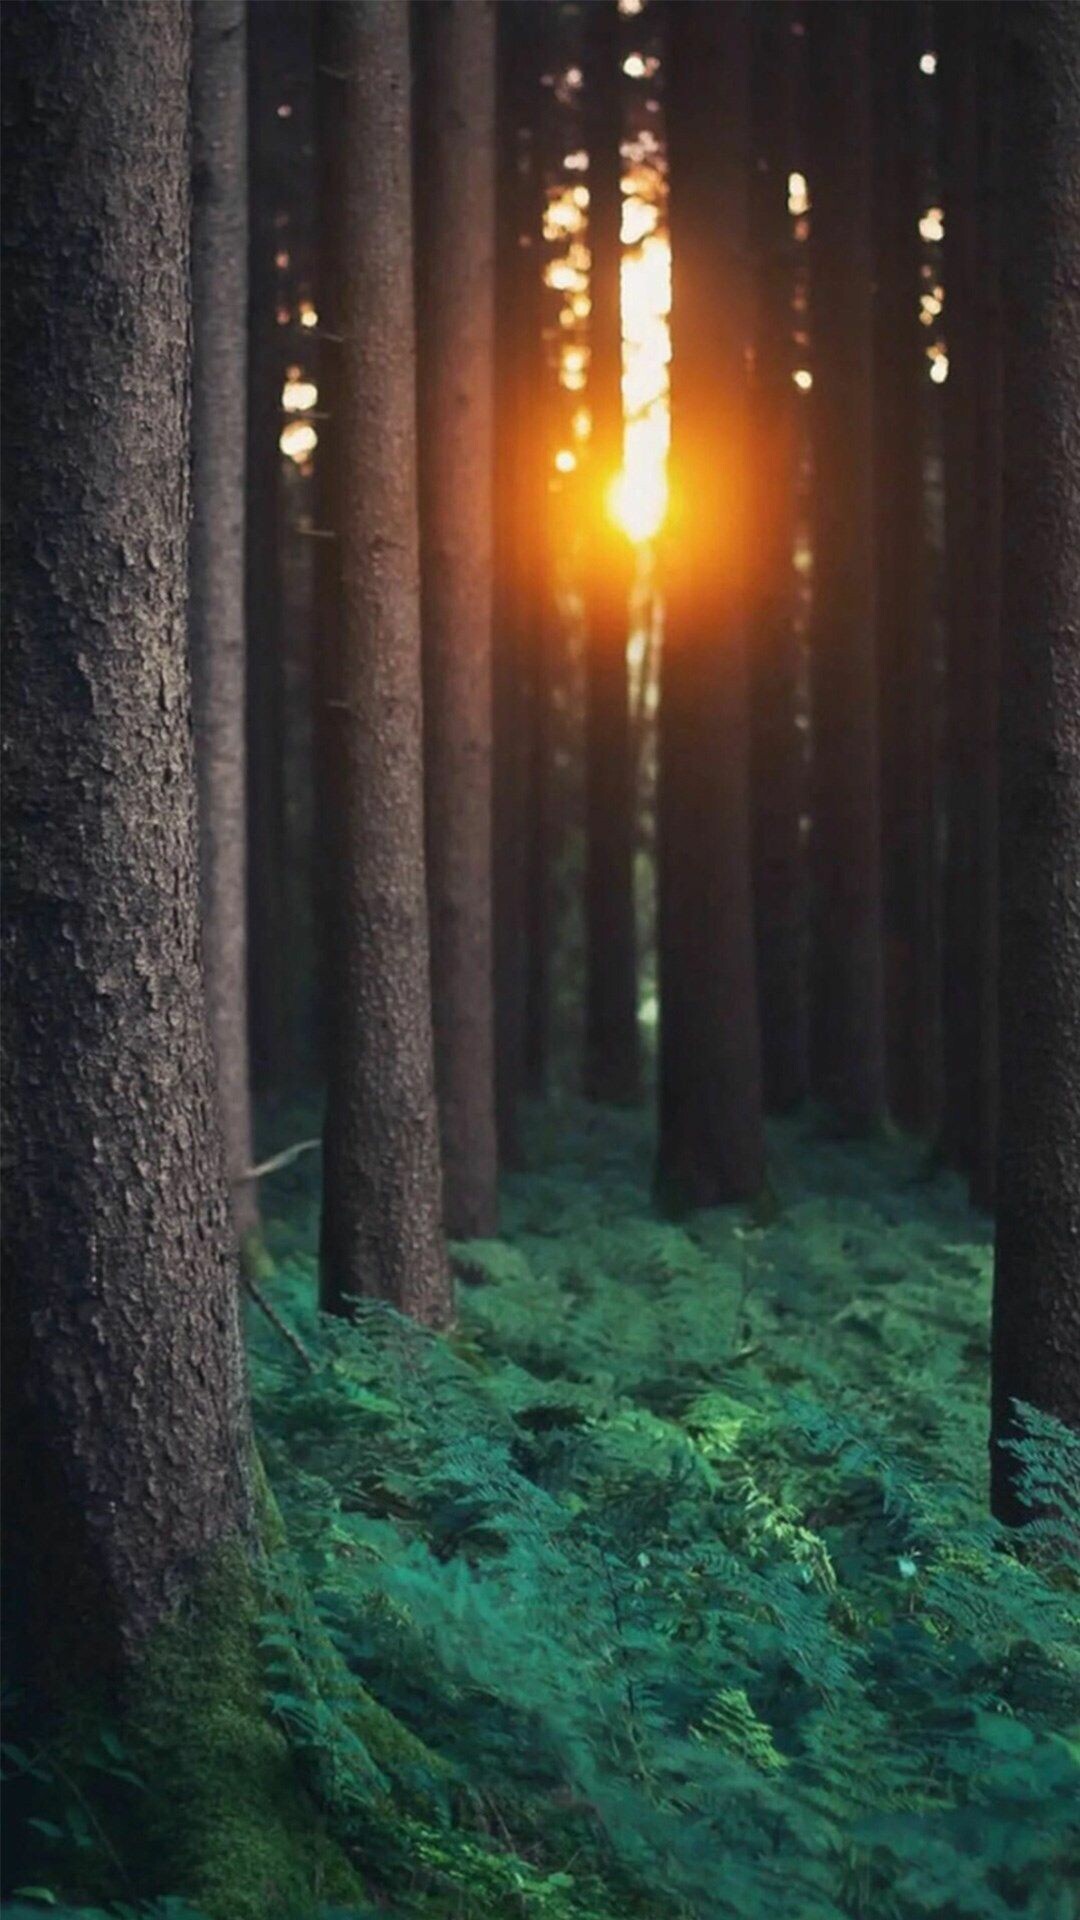 Morning sunlight through trees, Soft beams of glow, Nature's embrace, Serenity captured, 1080x1920 Full HD Phone